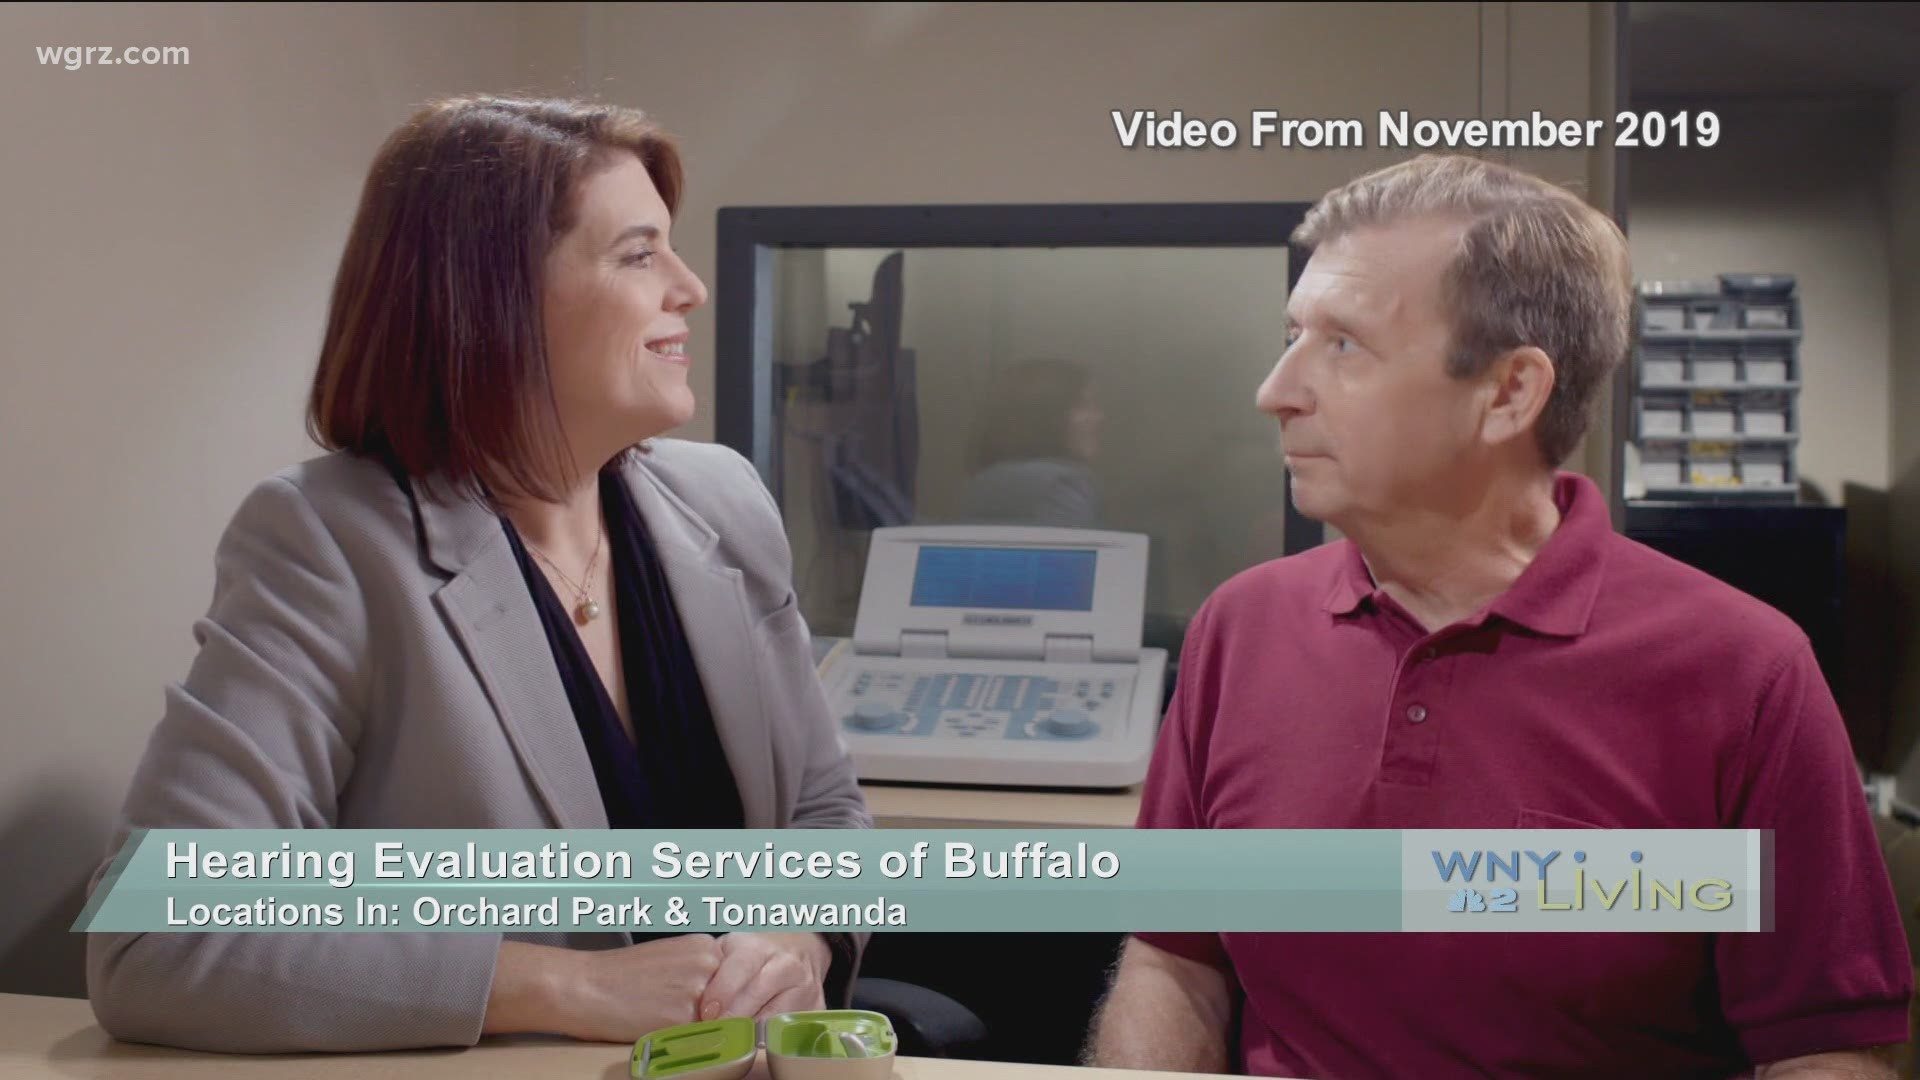 WNY Living - January 9 - Hearing Evaluation Services of Buffalo (THIS VIDEO IS SPONSORED BY HEARING EVALUATION SERVICES OF BUFFALO)